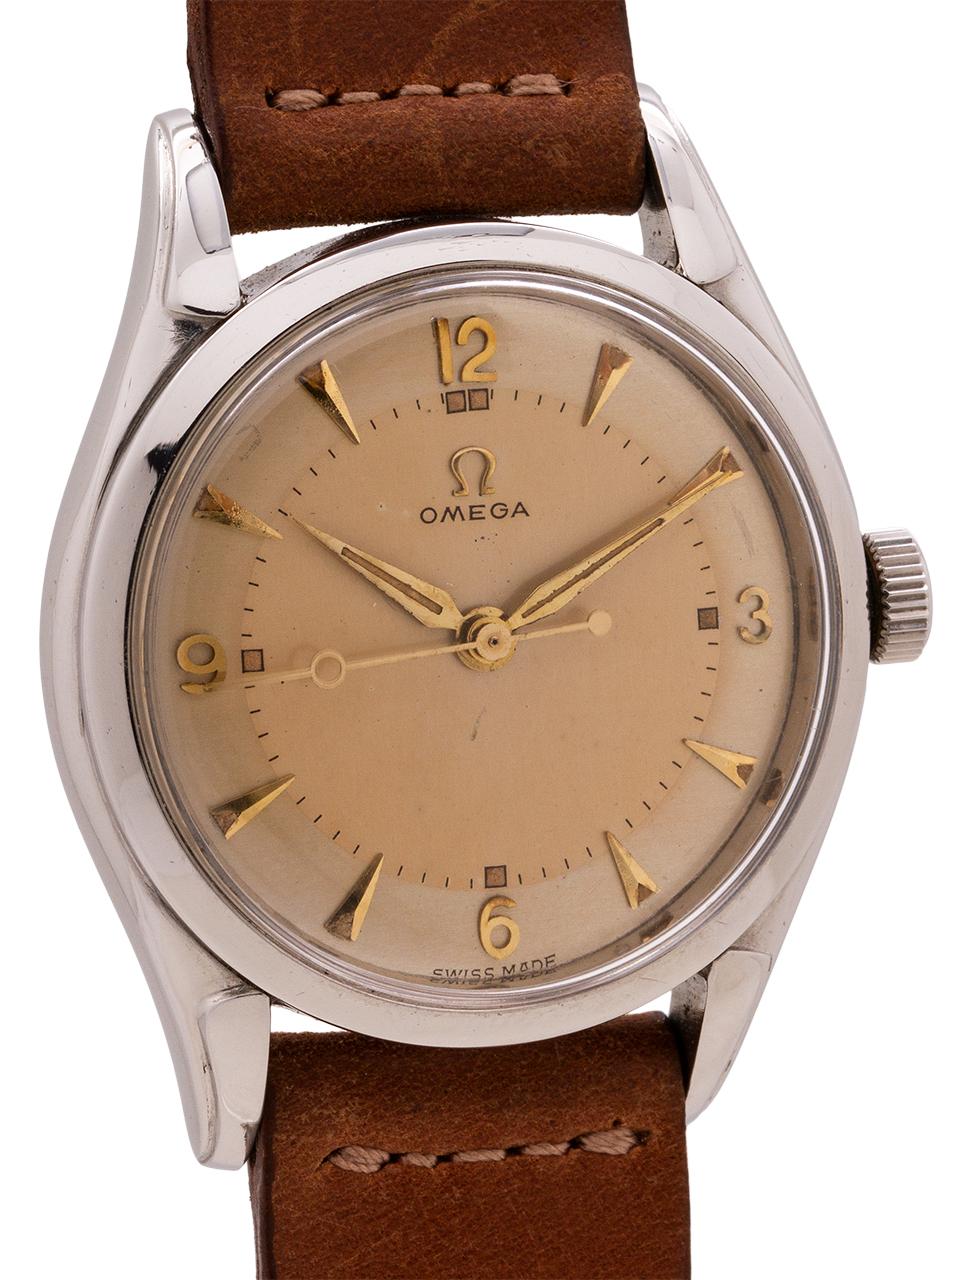 
Vintage Omega stainless steel case ref # 2721.2 circa 1952. Featuring a robust design 34 x 43mm case with curved extended lugs, heavy screw down case back. With very pleasing 2 tone parchment colored dial with gold mirror figures and gilt leaf